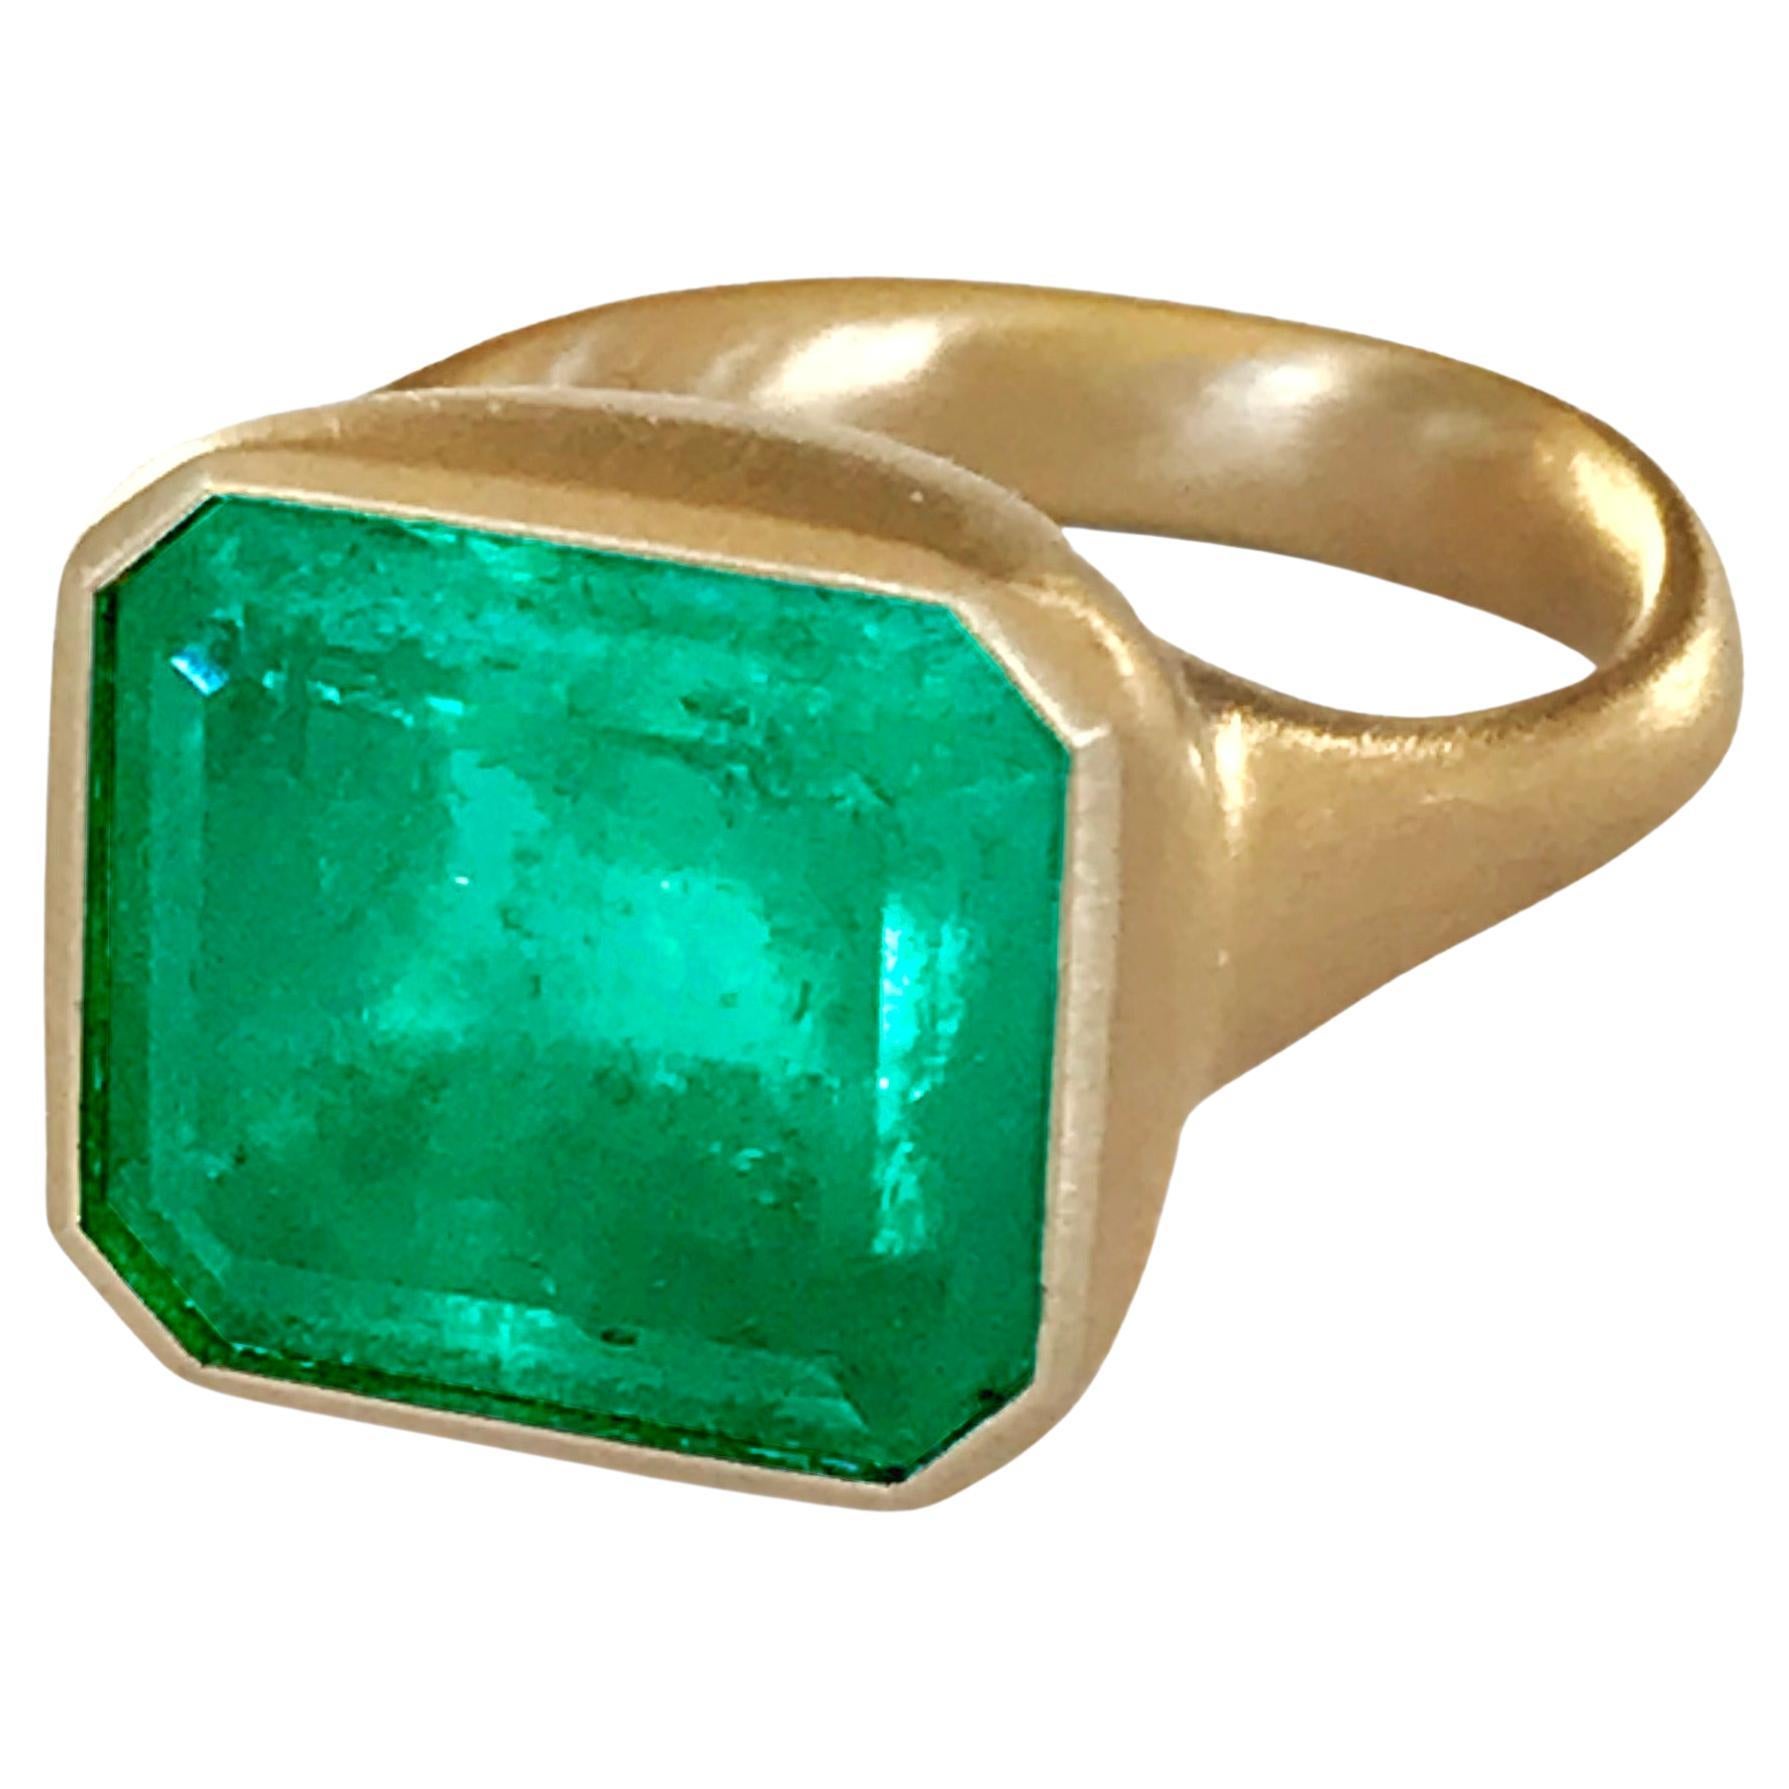 Dalben Magnificent 8.3 Carat Certified Colombian Emerald Yellow Gold Ring